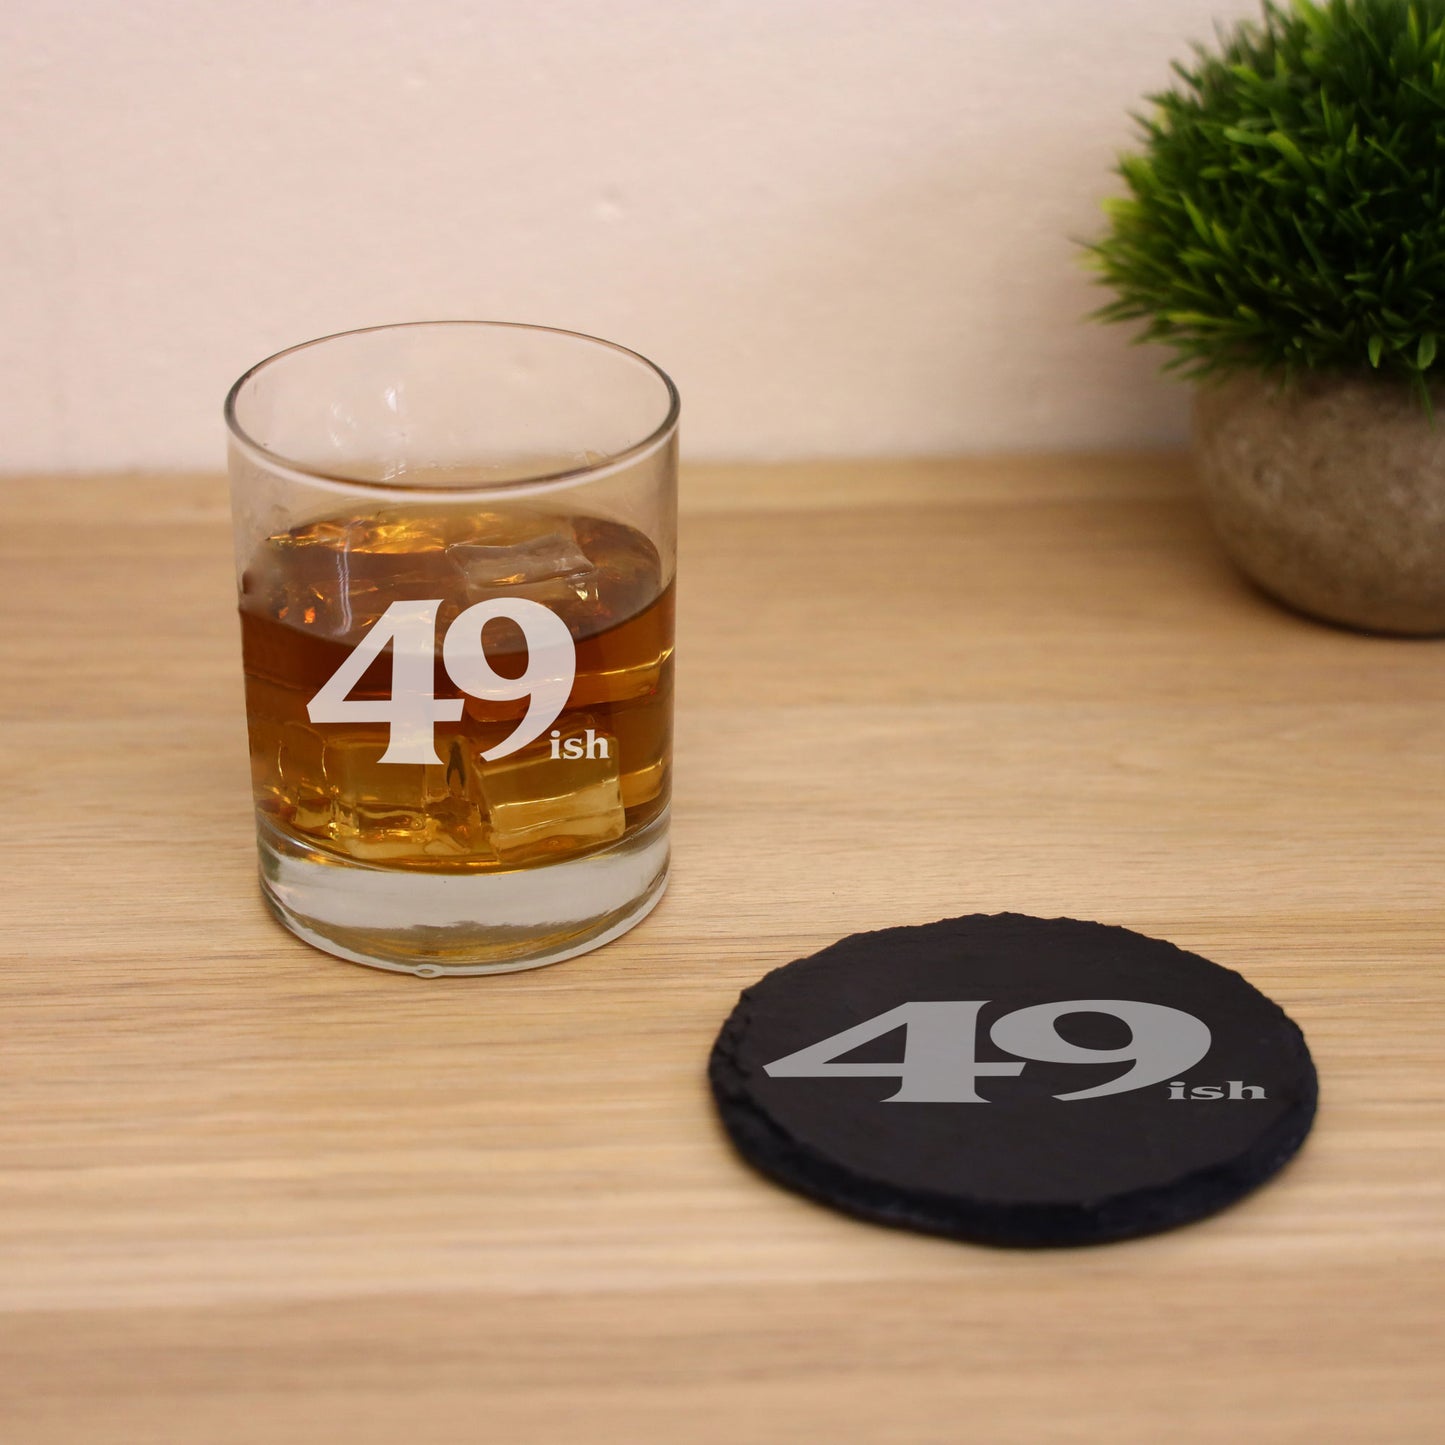 49ish Whisky Glass and/or Coaster Set  - Always Looking Good - Glass & Round Coaster Set  